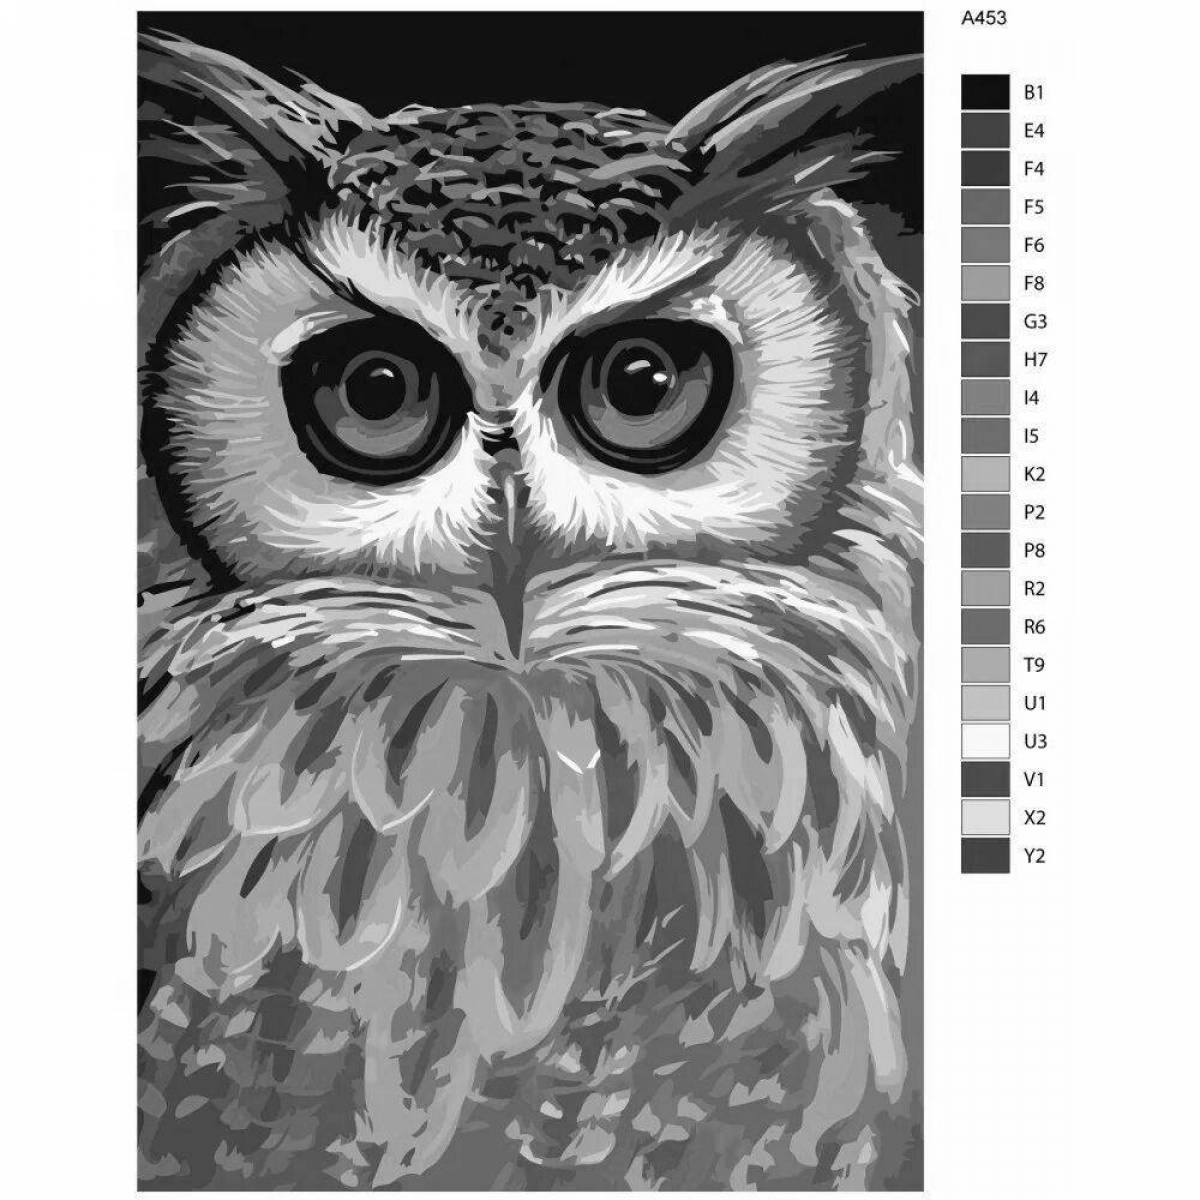 Owl by numbers #1